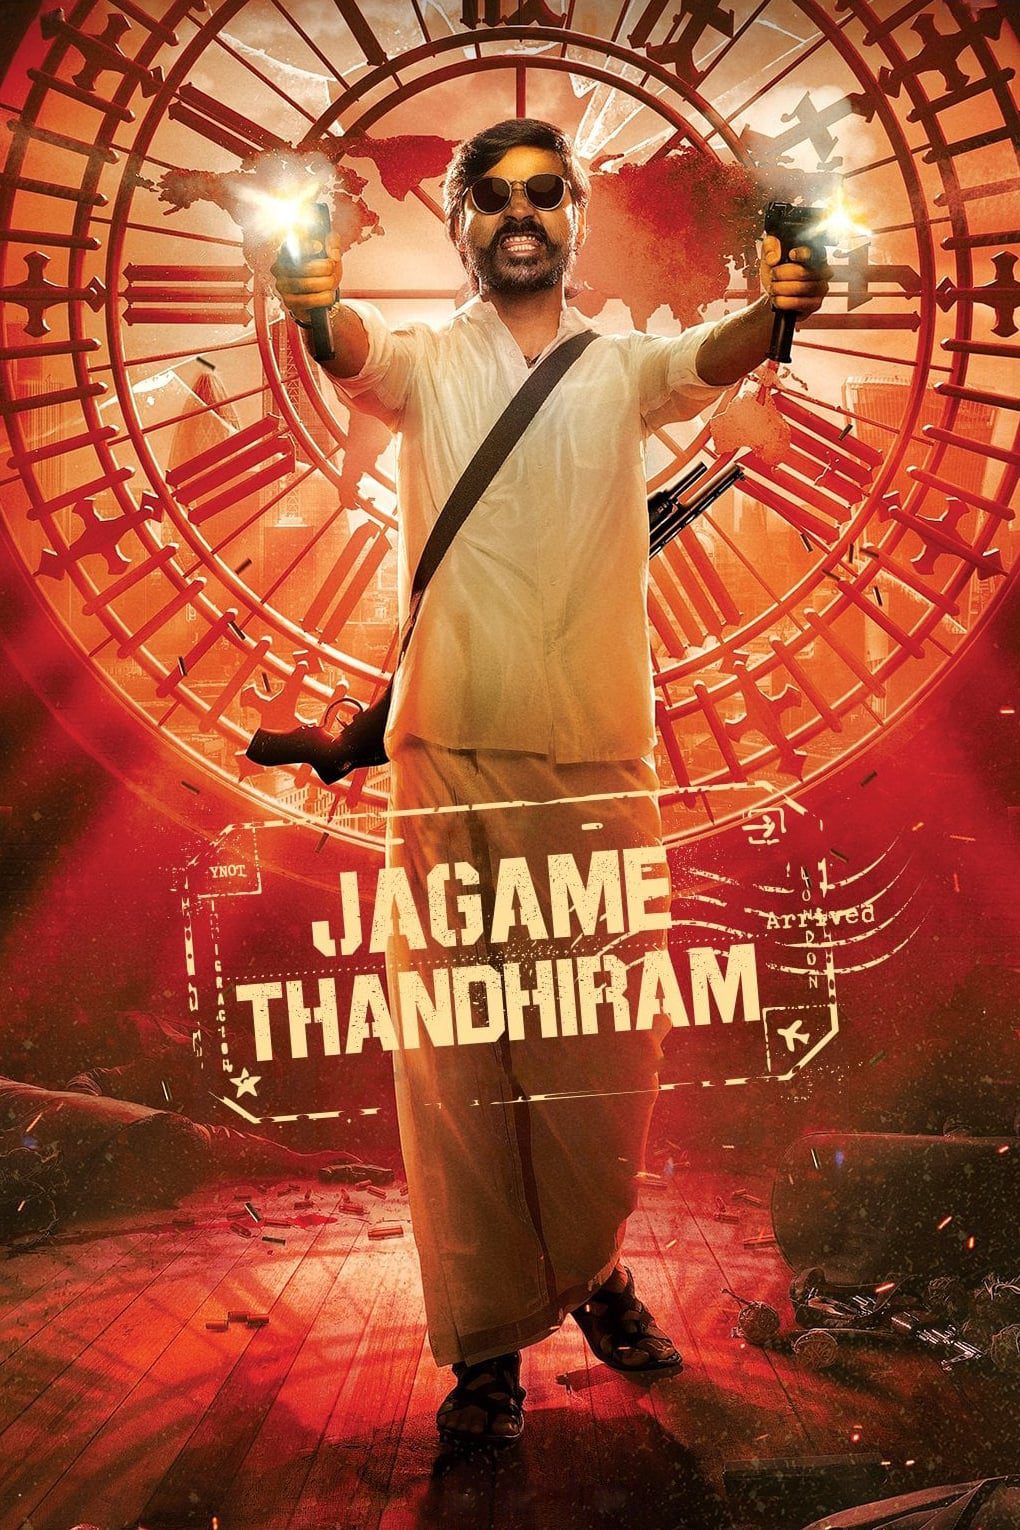 Poster for the movie "Jagame Thandhiram"